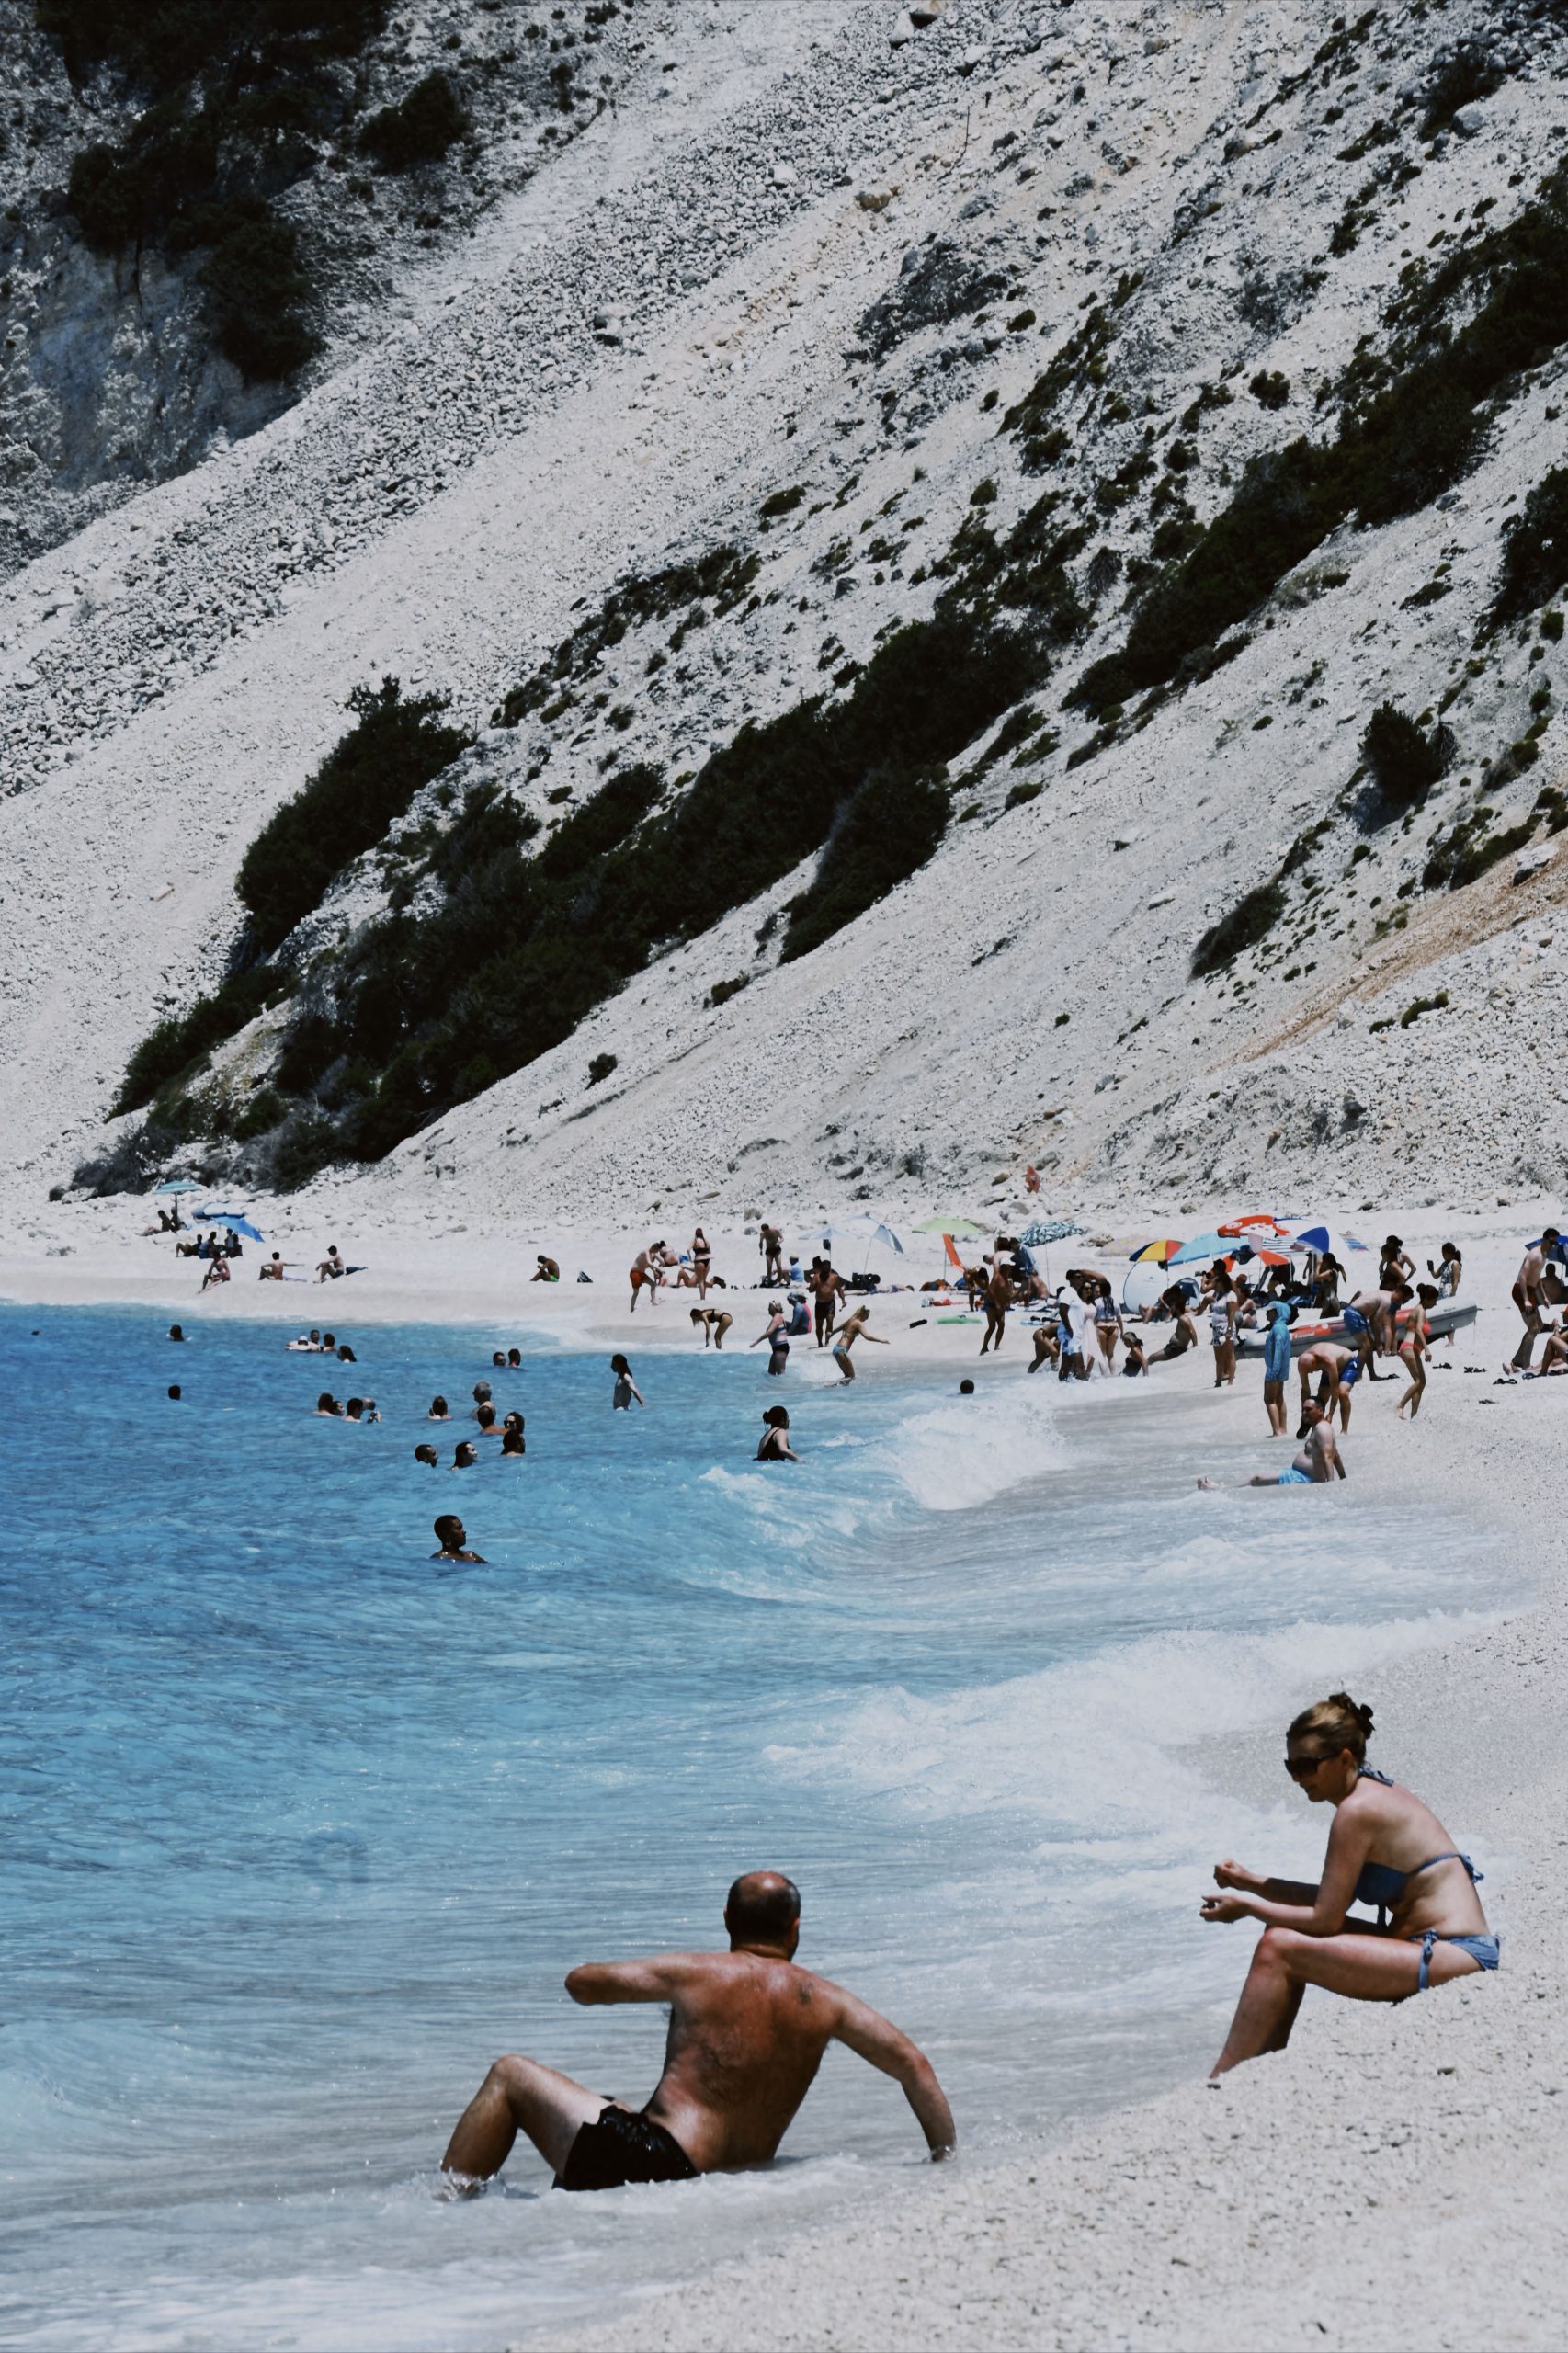 Teal blue water cuts into the white sands of a beach. The background of the image is sloping sand that cuts diagonally into the distant water. The sand slope goes up so high that you cannot see the sky at all. There are people playing in the distant shore, and a couple sits in the water close to the camera, the woman facing the waves and the man in the water, reaching back to her.